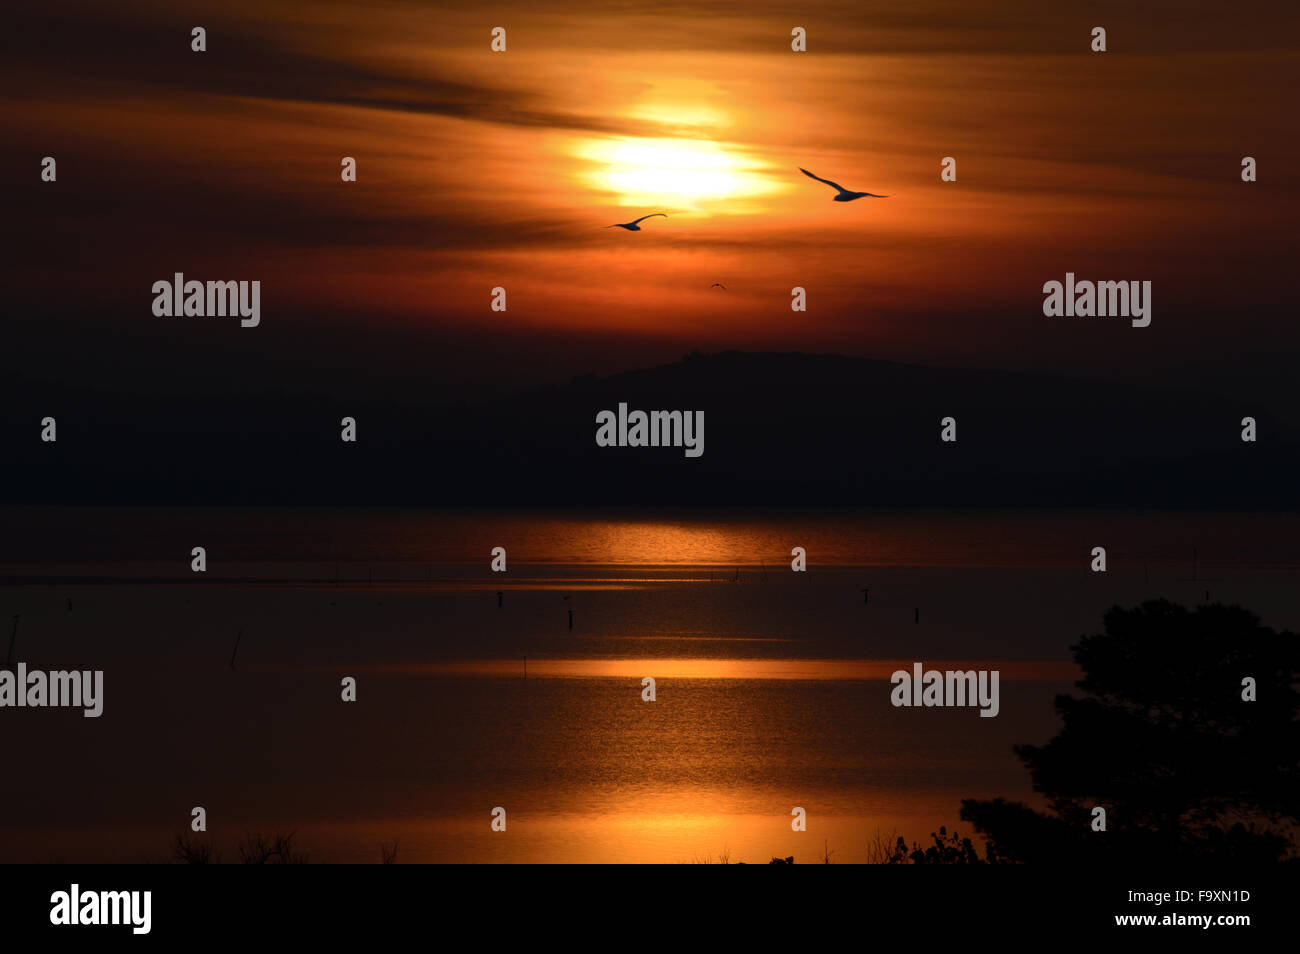 Seascape at sunrise over water, in copper and black with two birds in flight Stock Photo